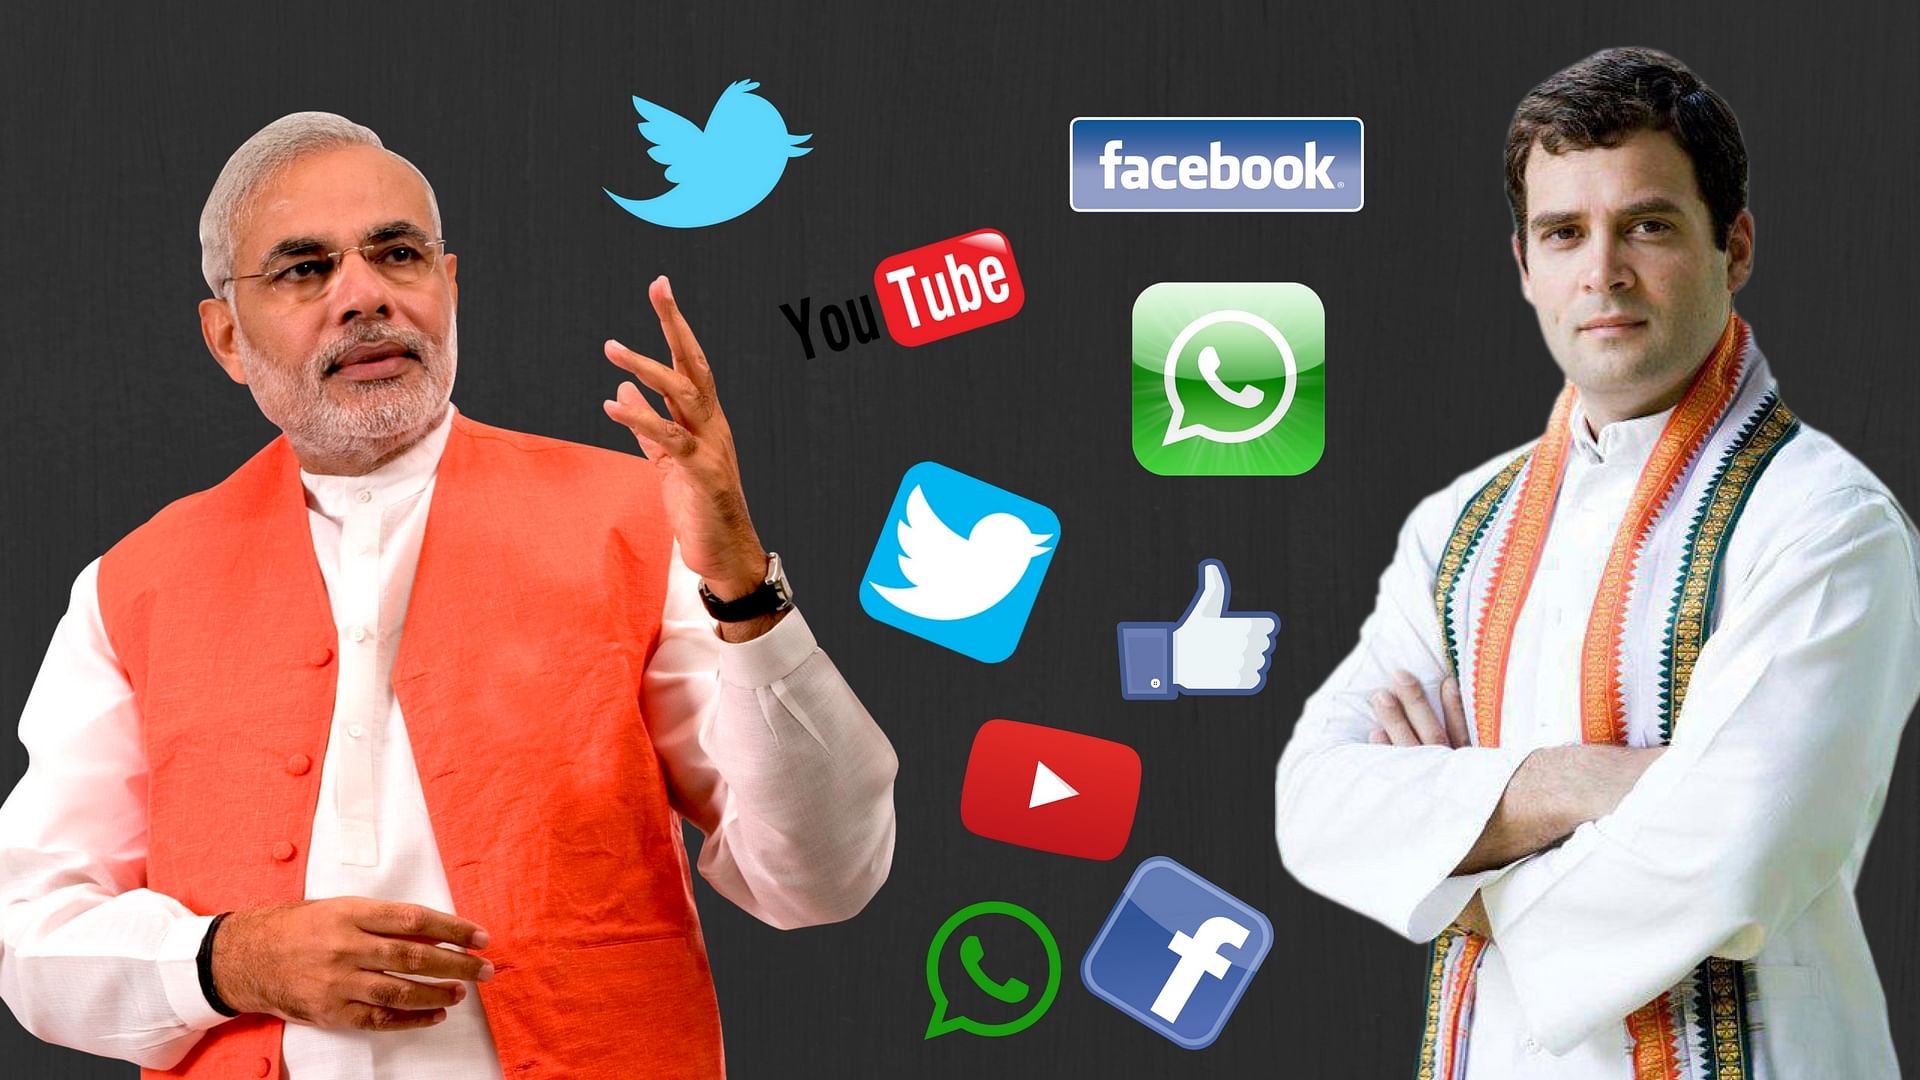 Social media has become the most powerful tool for political parties to reach people.